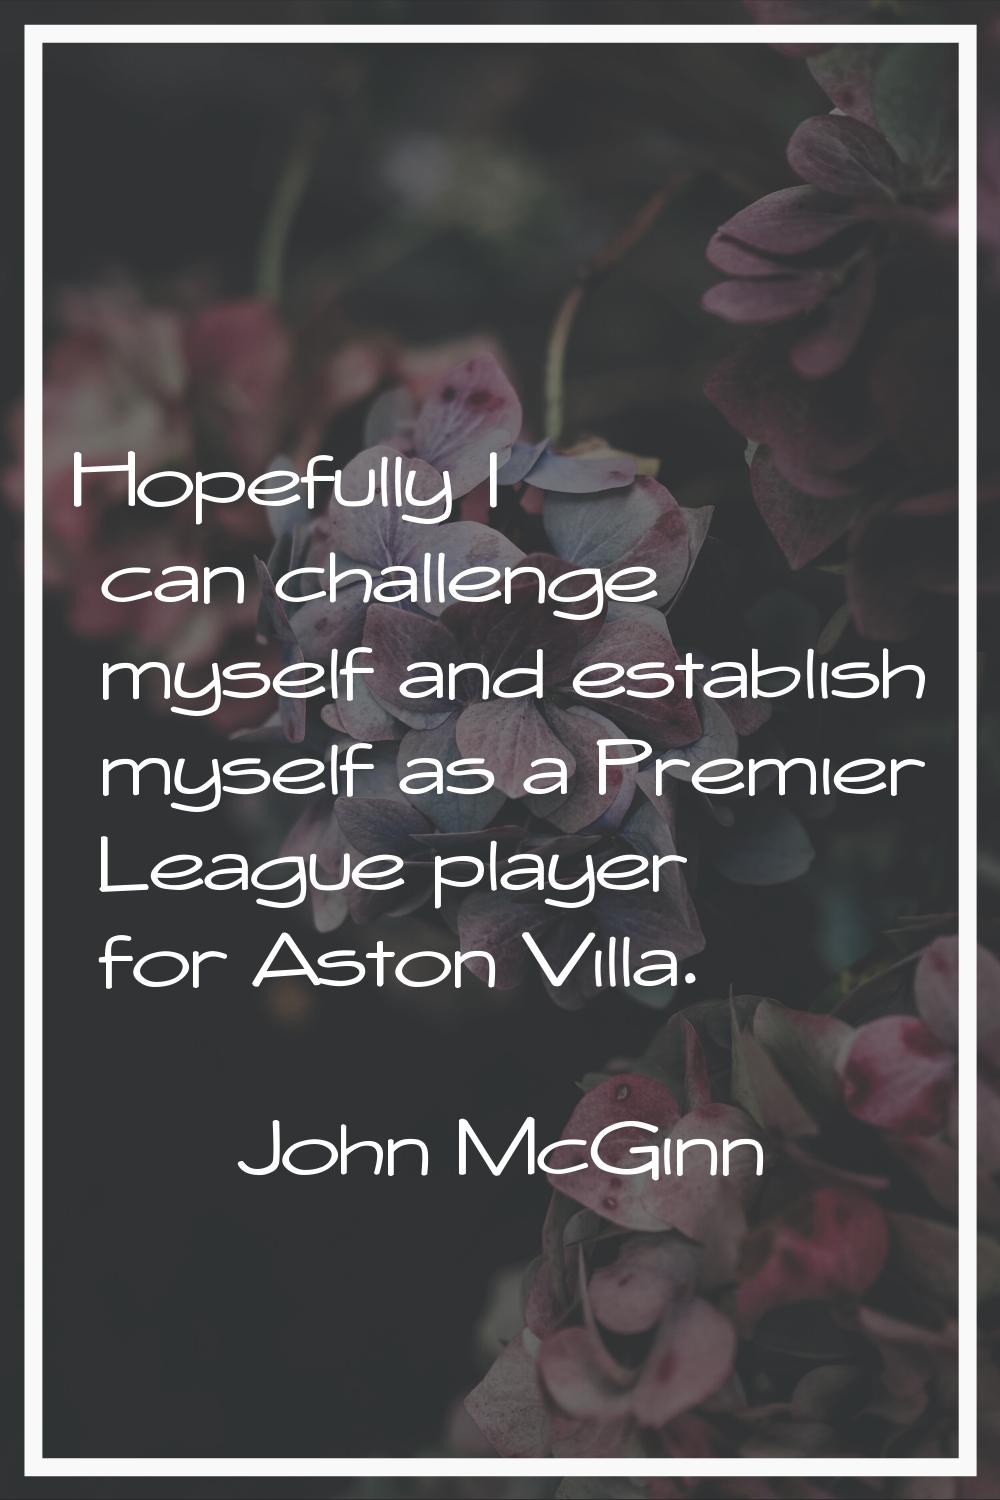 Hopefully I can challenge myself and establish myself as a Premier League player for Aston Villa.